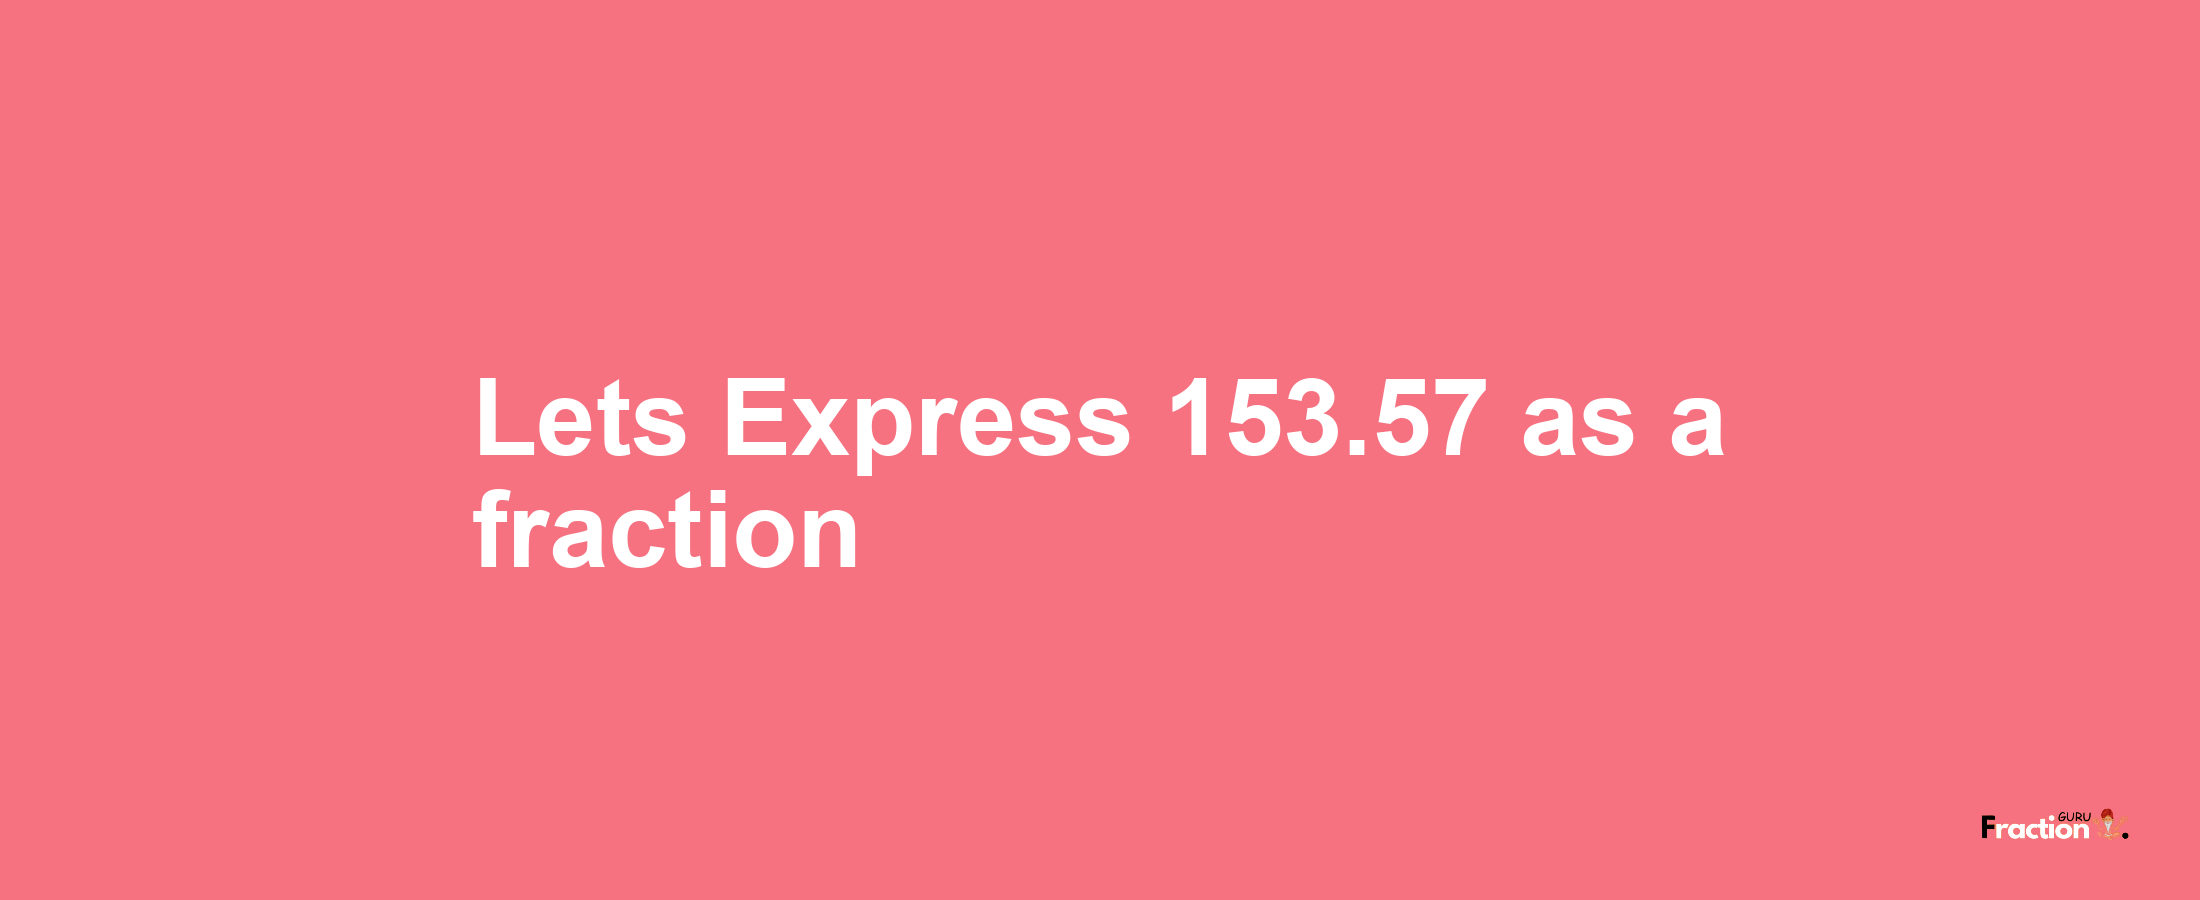 Lets Express 153.57 as afraction